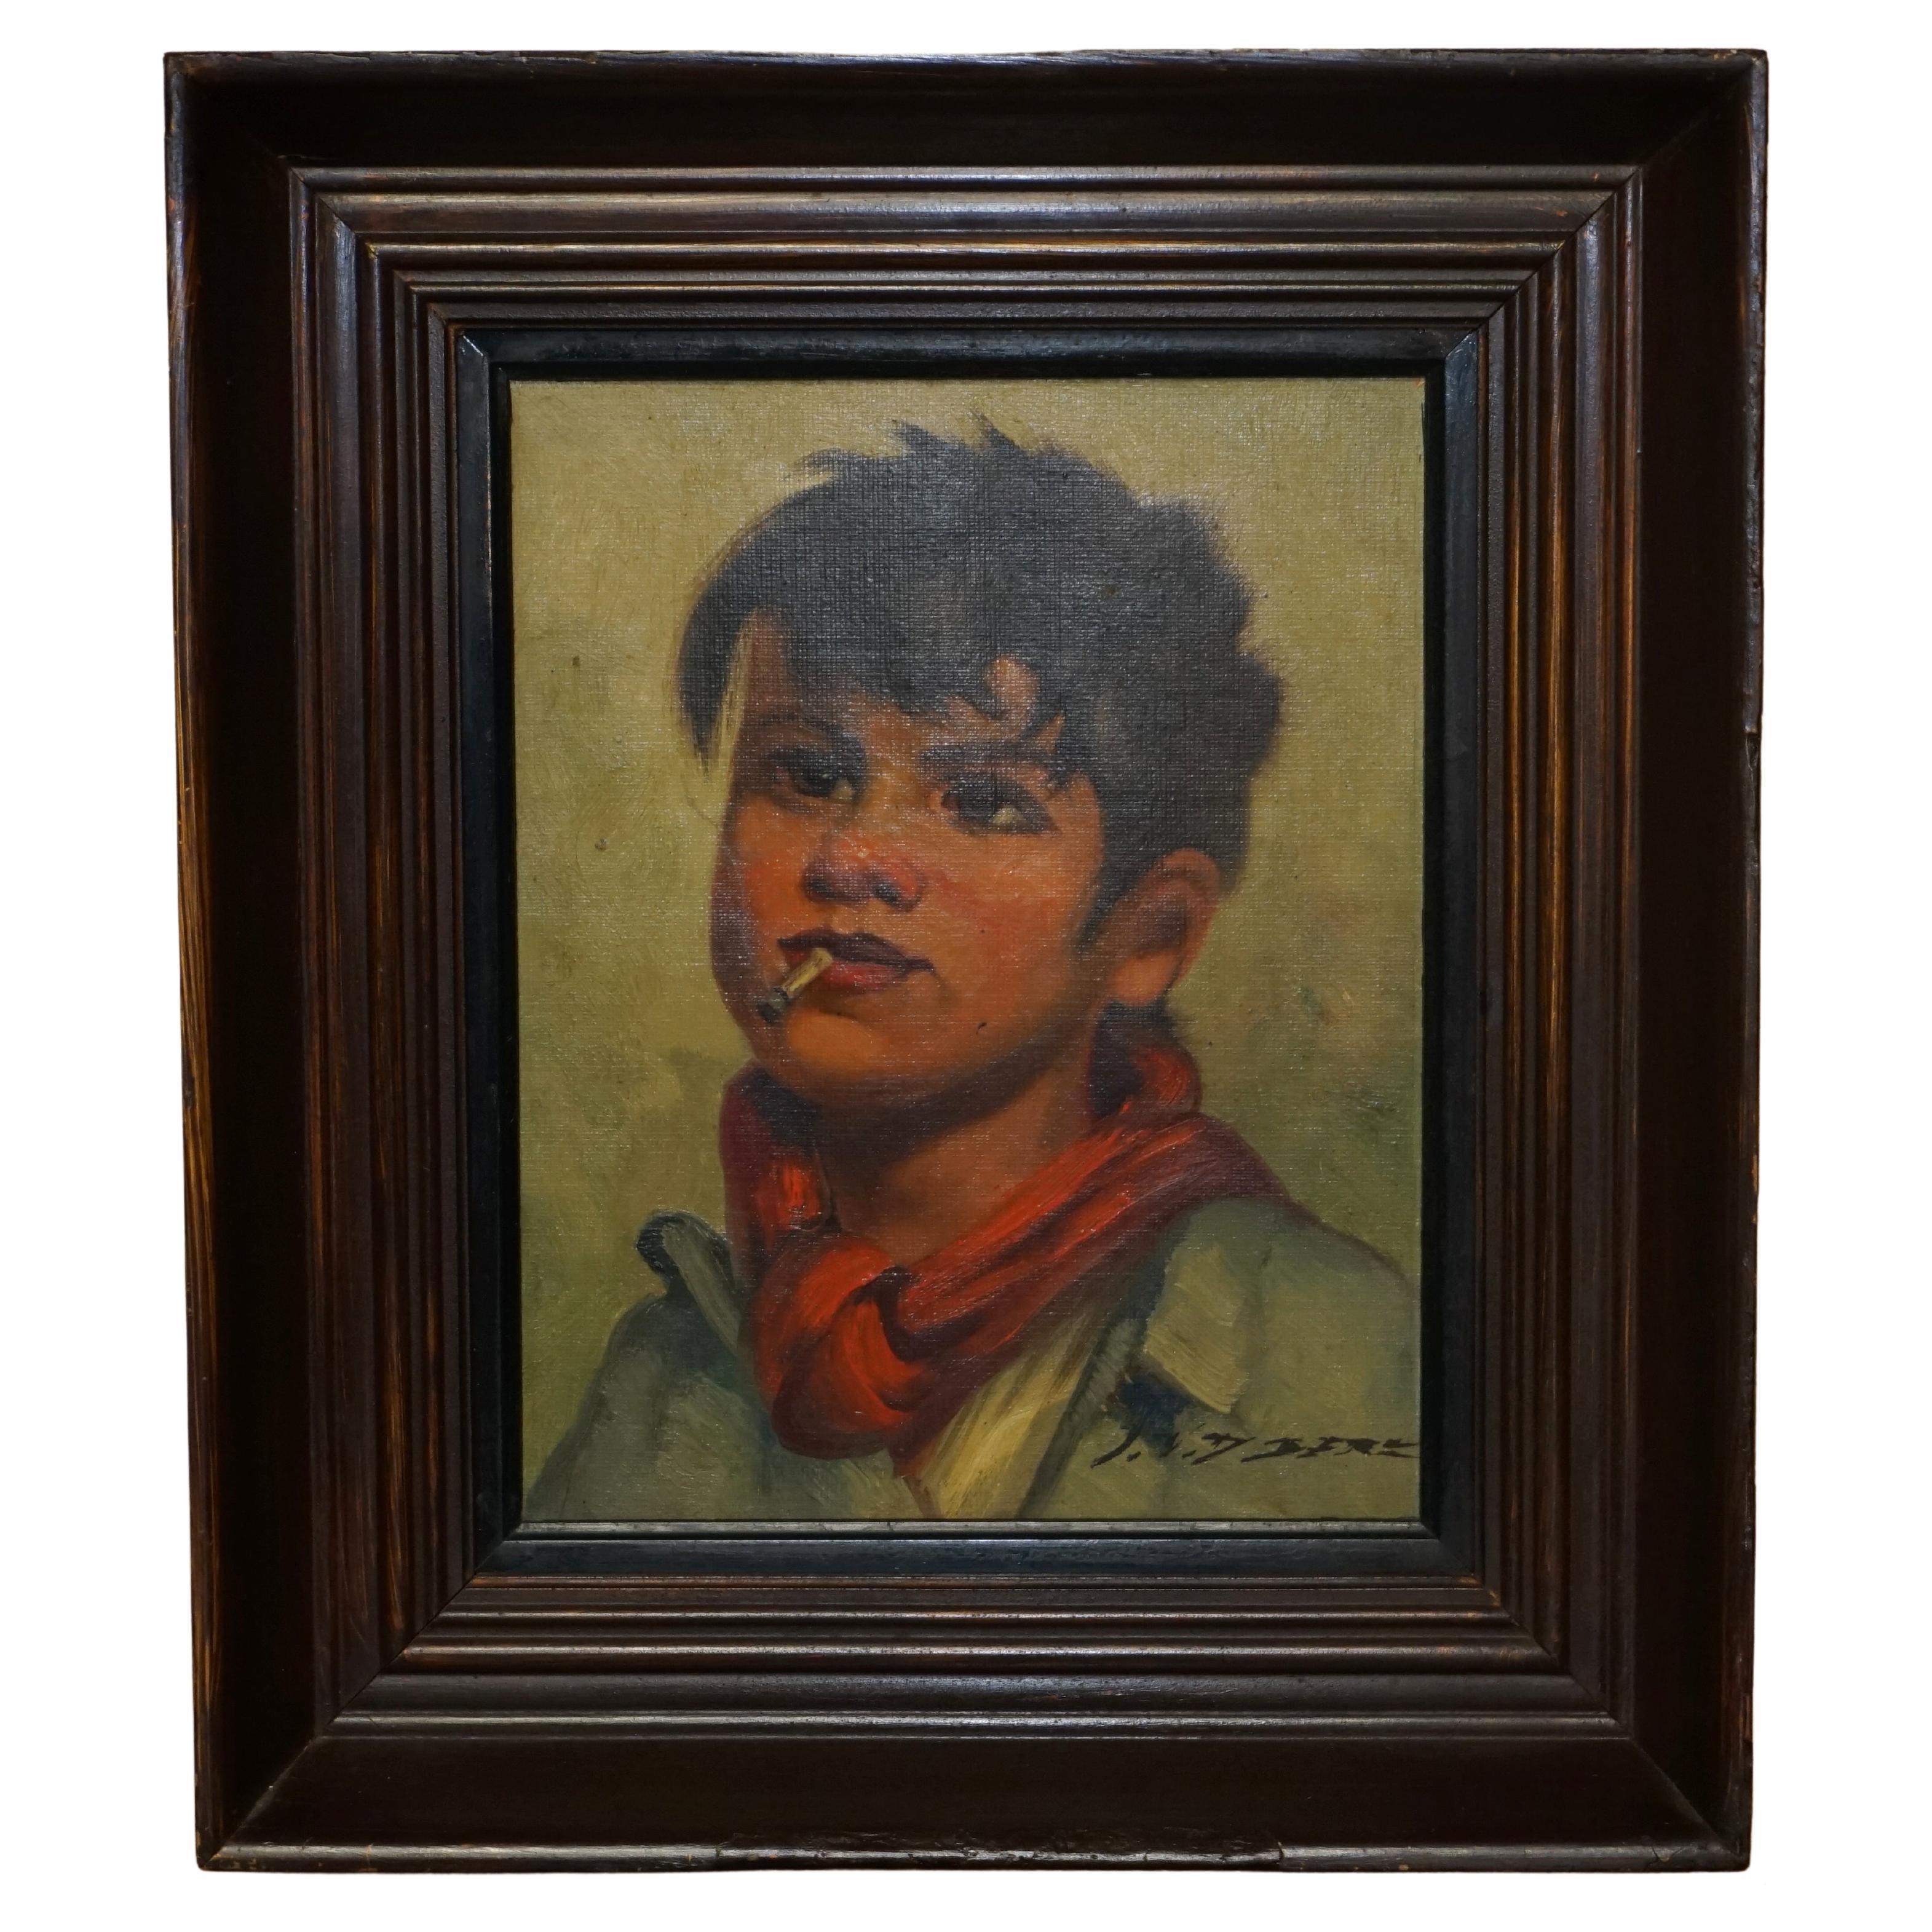 Antique Signed circa 1930 Belgium Oil on Canvas Painting of Young Boy Smoking